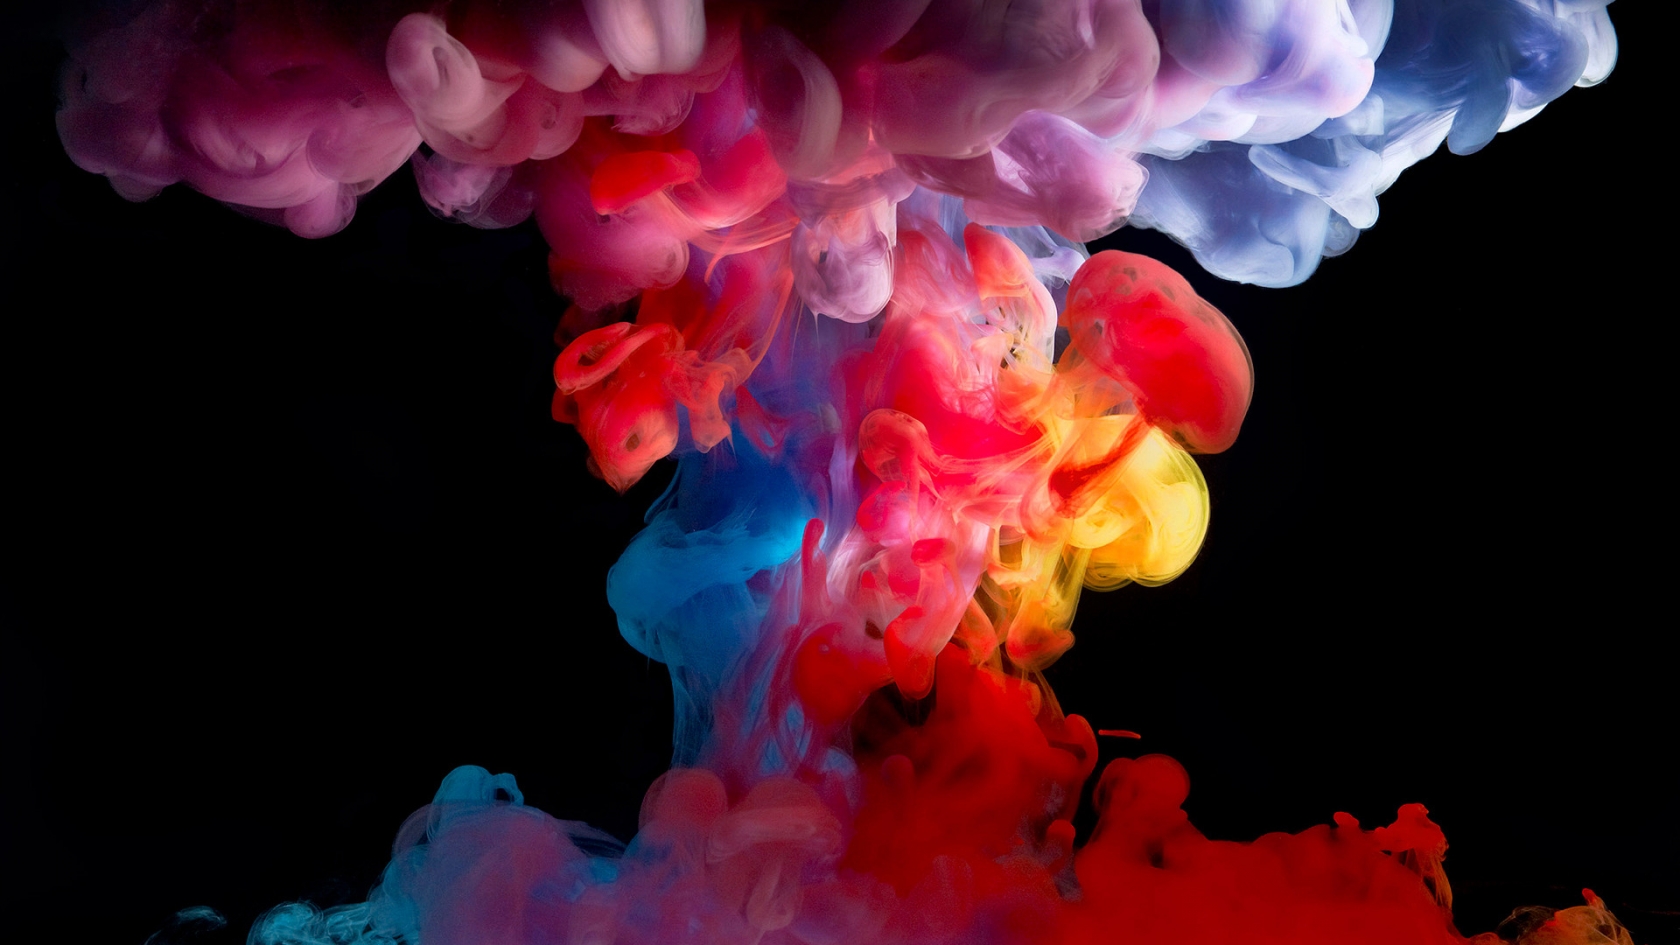 Colored Smoke Paint for 1680 x 945 HDTV resolution